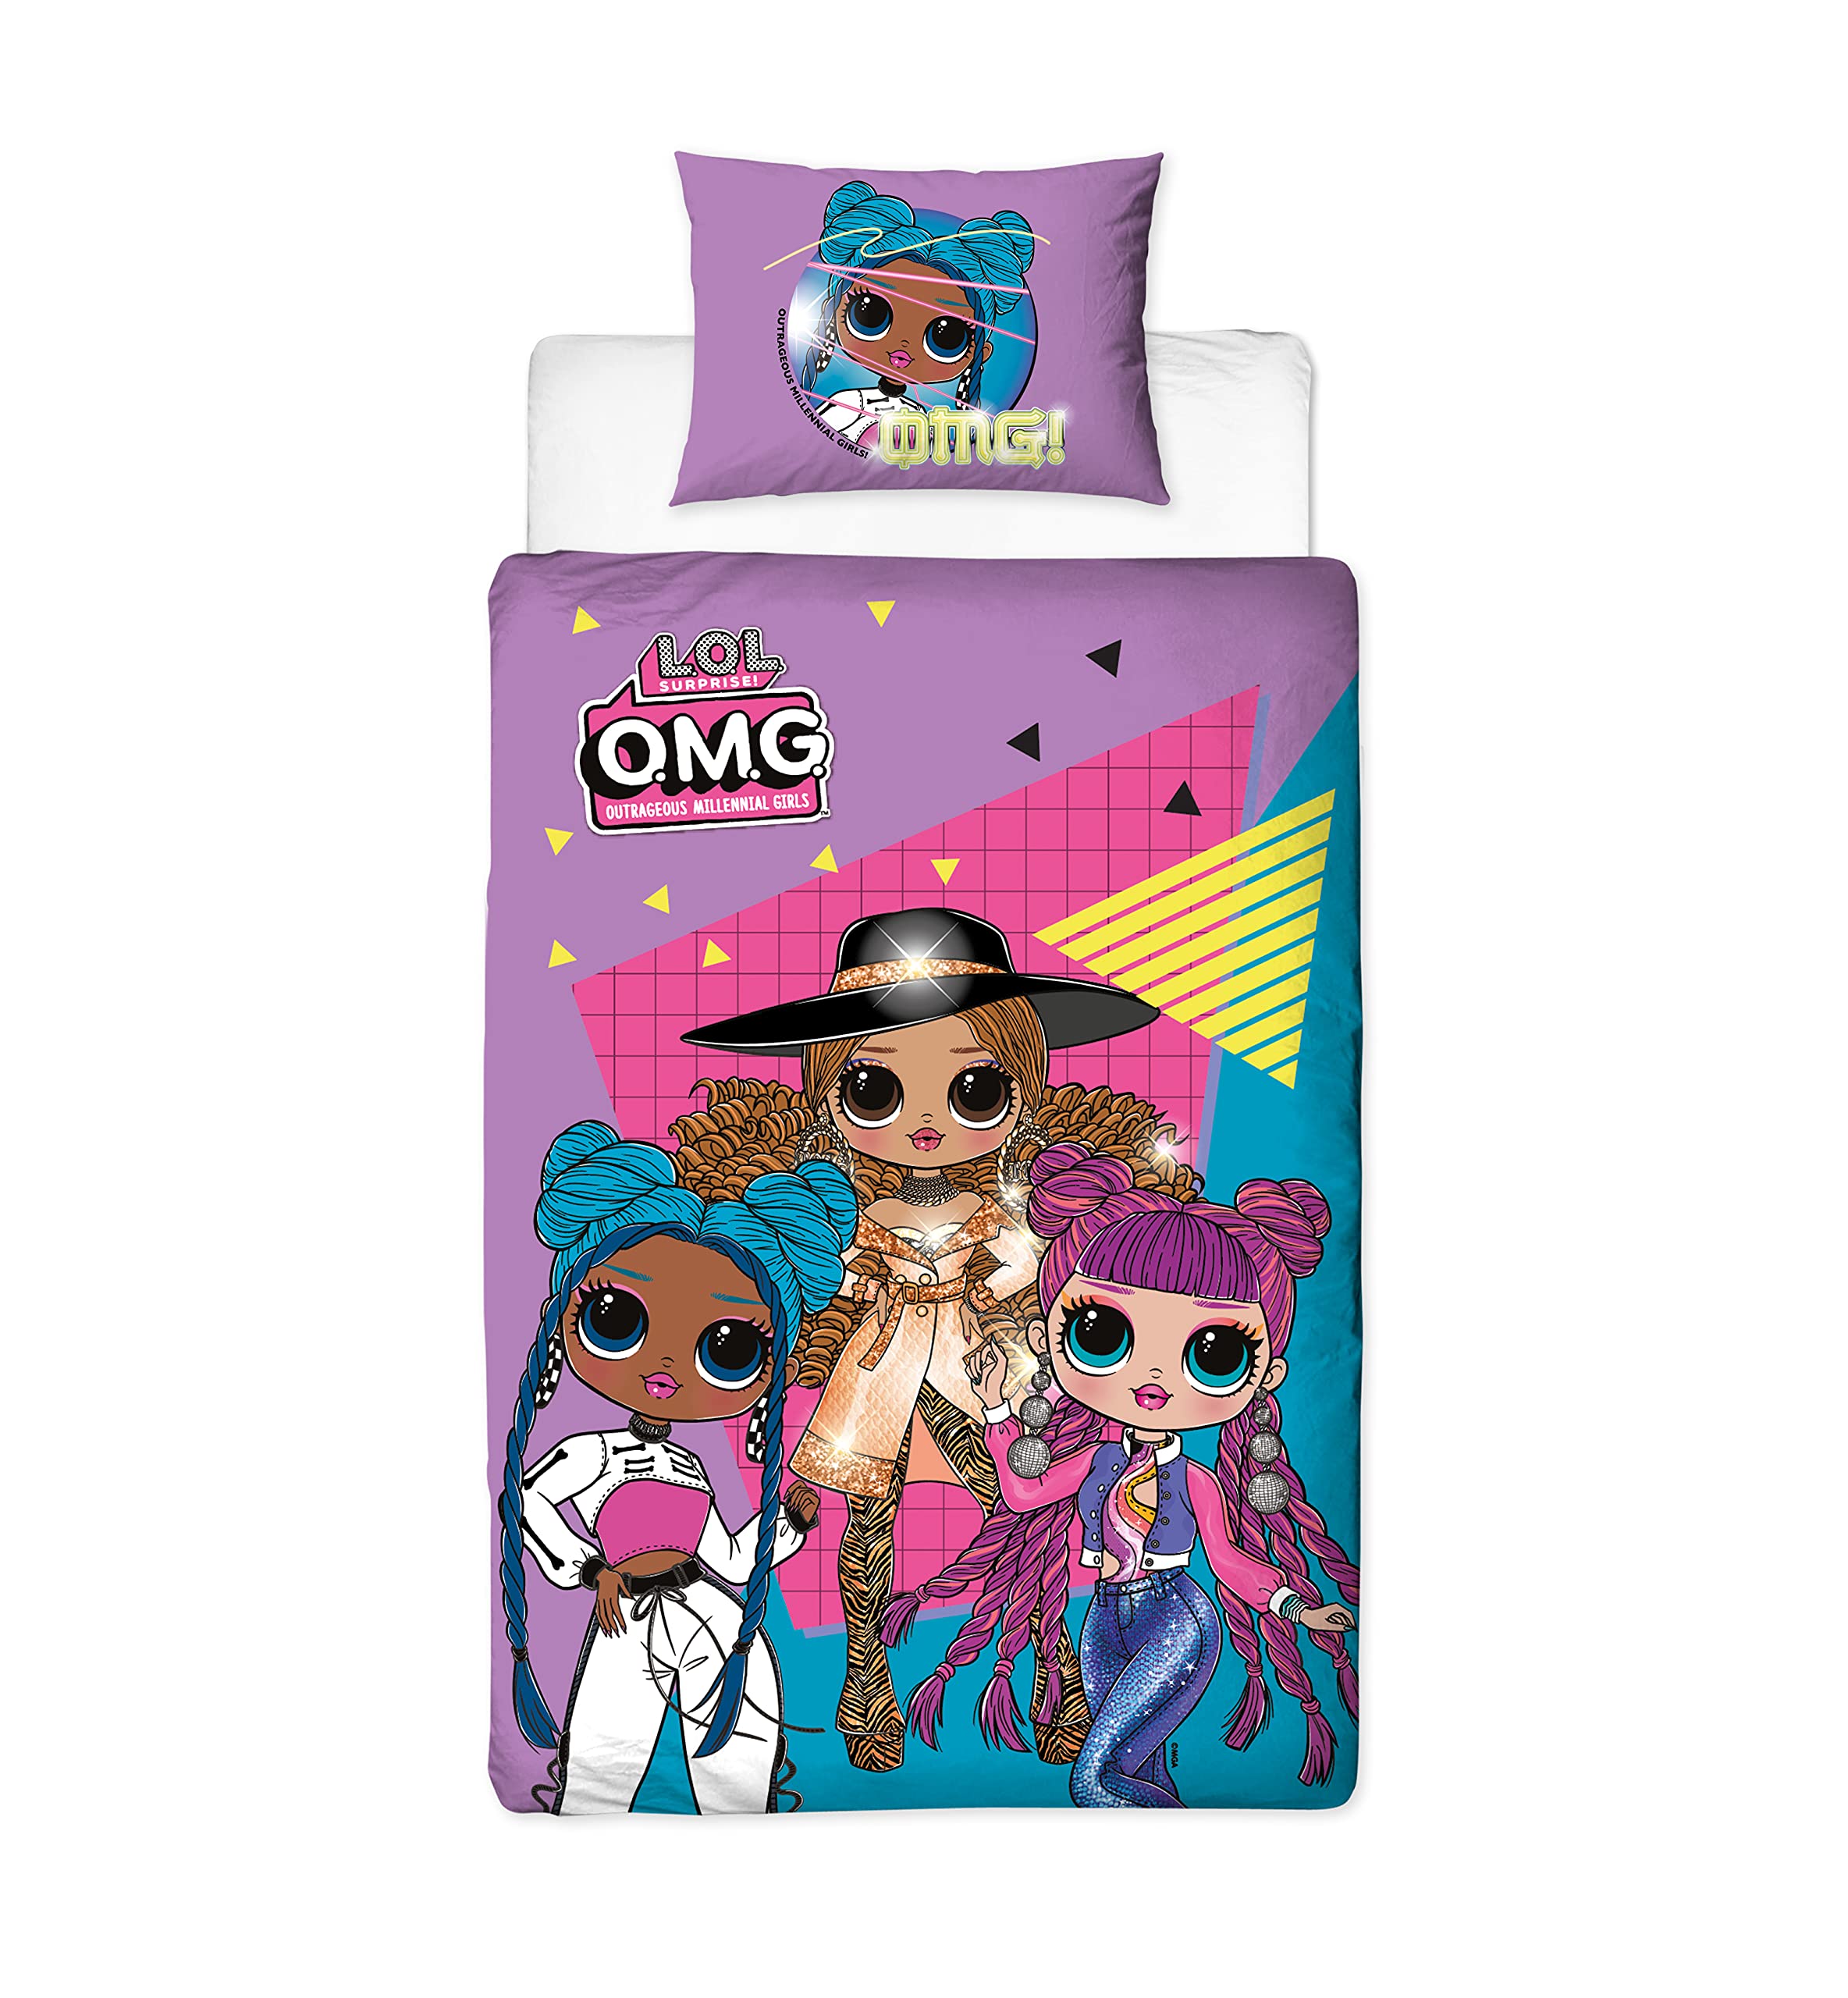 LOL Surprise! OMG Official Single Duvet Cover | 2 Sided Reversible Beat Design with Matching Pillowcase Super Soft | Perfect For Any Bedroom, Purple (Single Duvet)